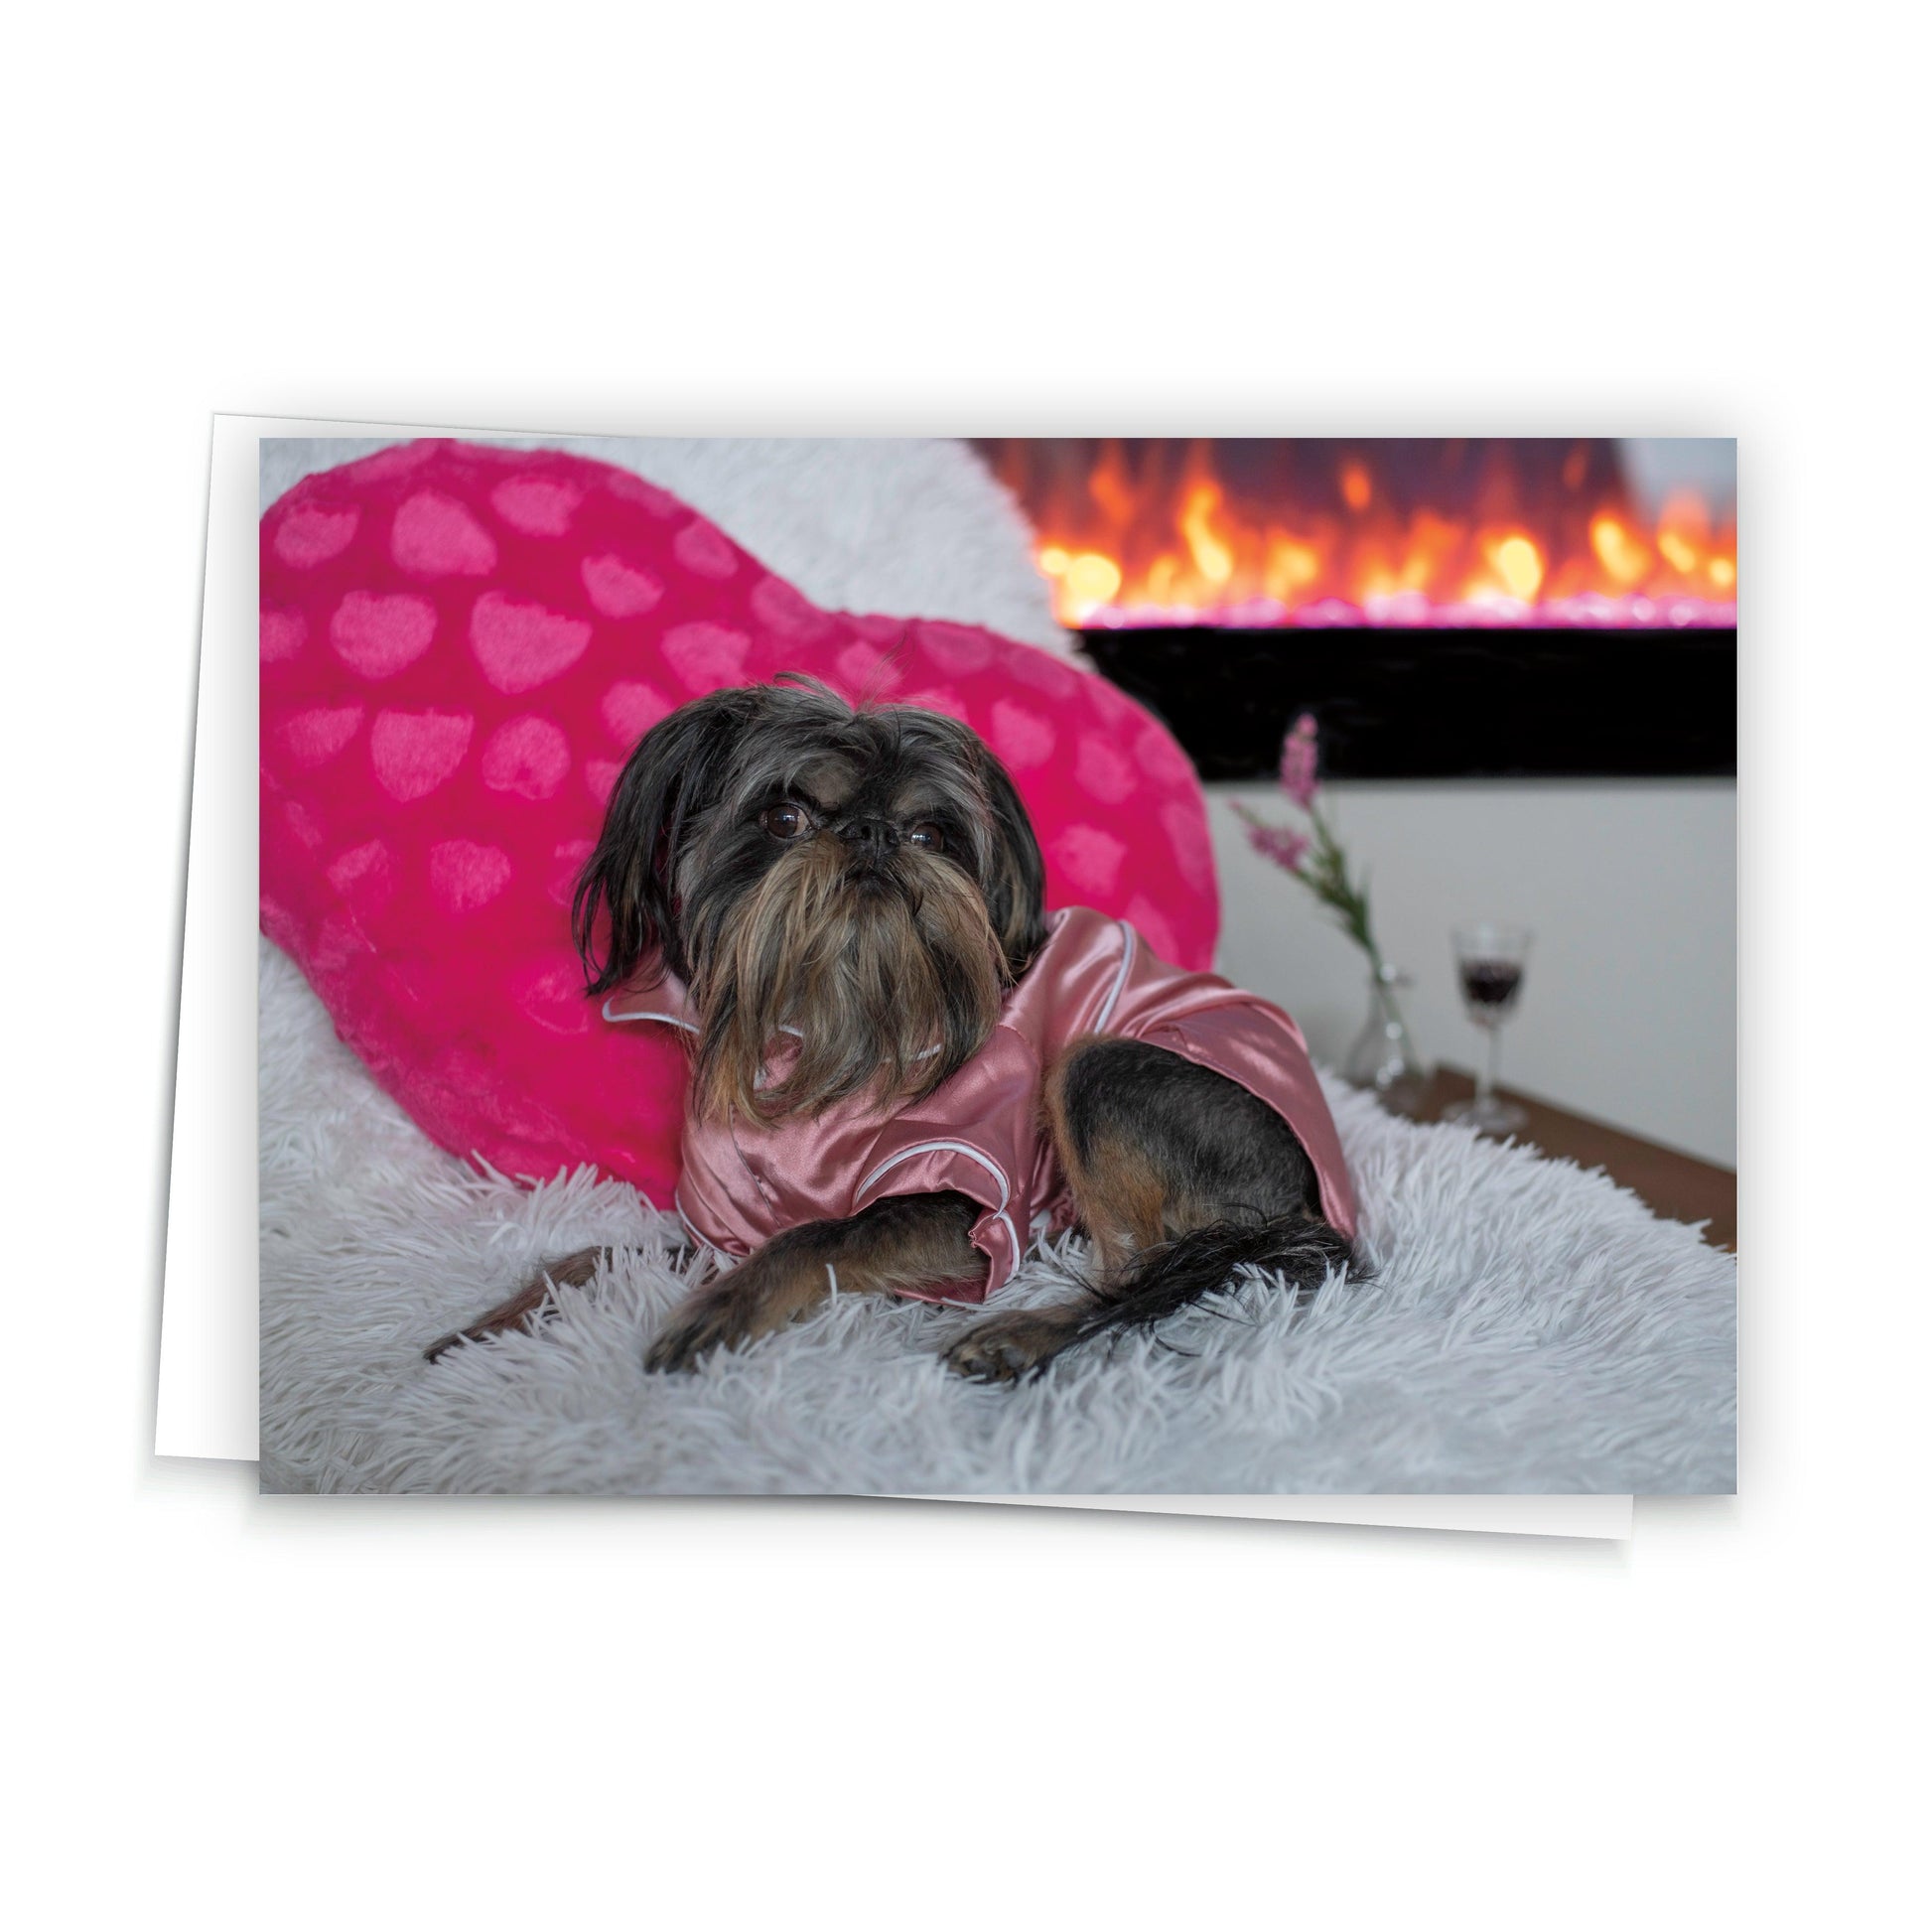 Brussels Griffon 'I can make your dreams come true' Greeting Card - JC Designs